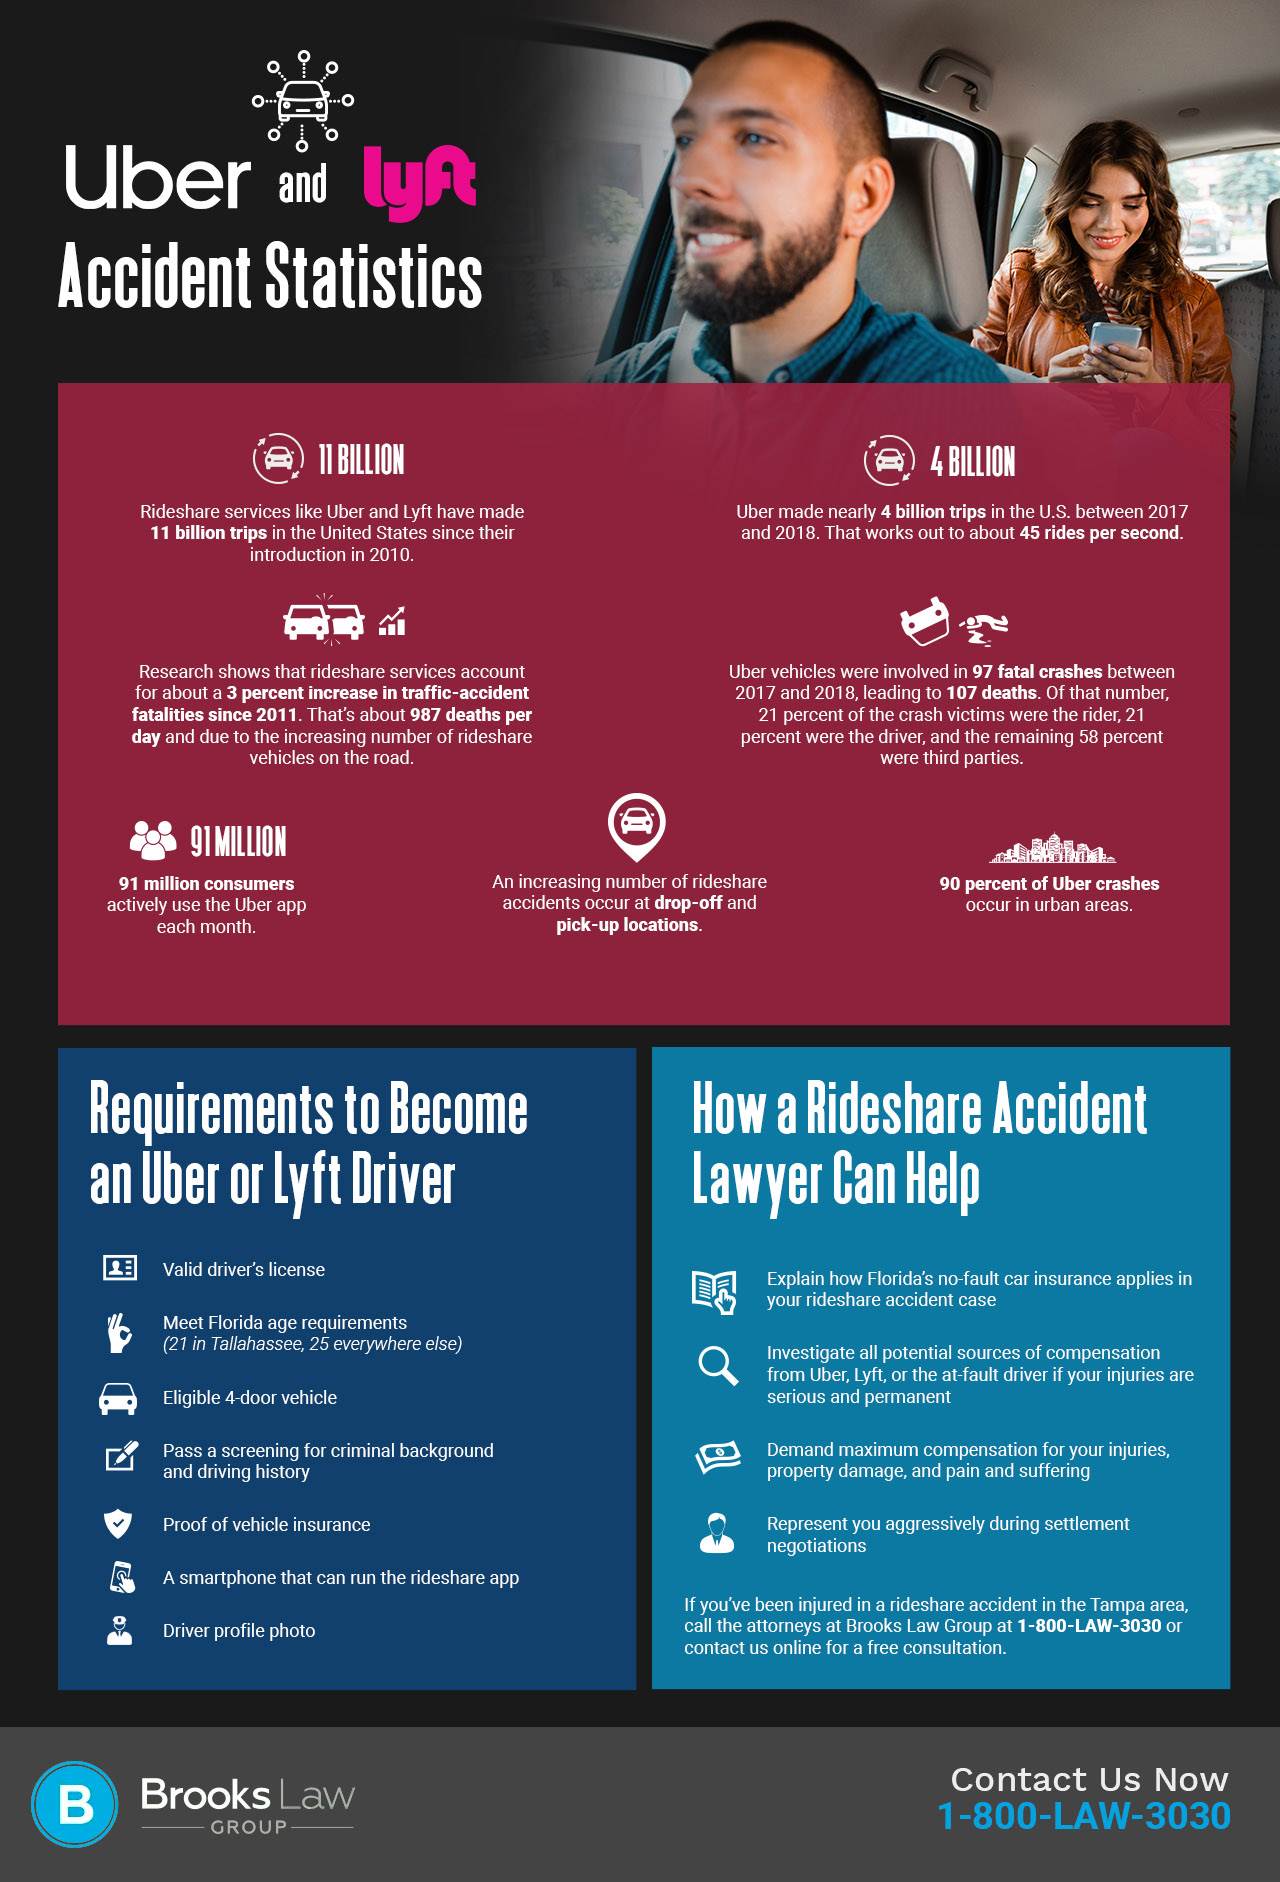 brookslawgroup-uber-and-lyft-crash-stats-infographic-28771524-a.jpg  by brookslawgroup